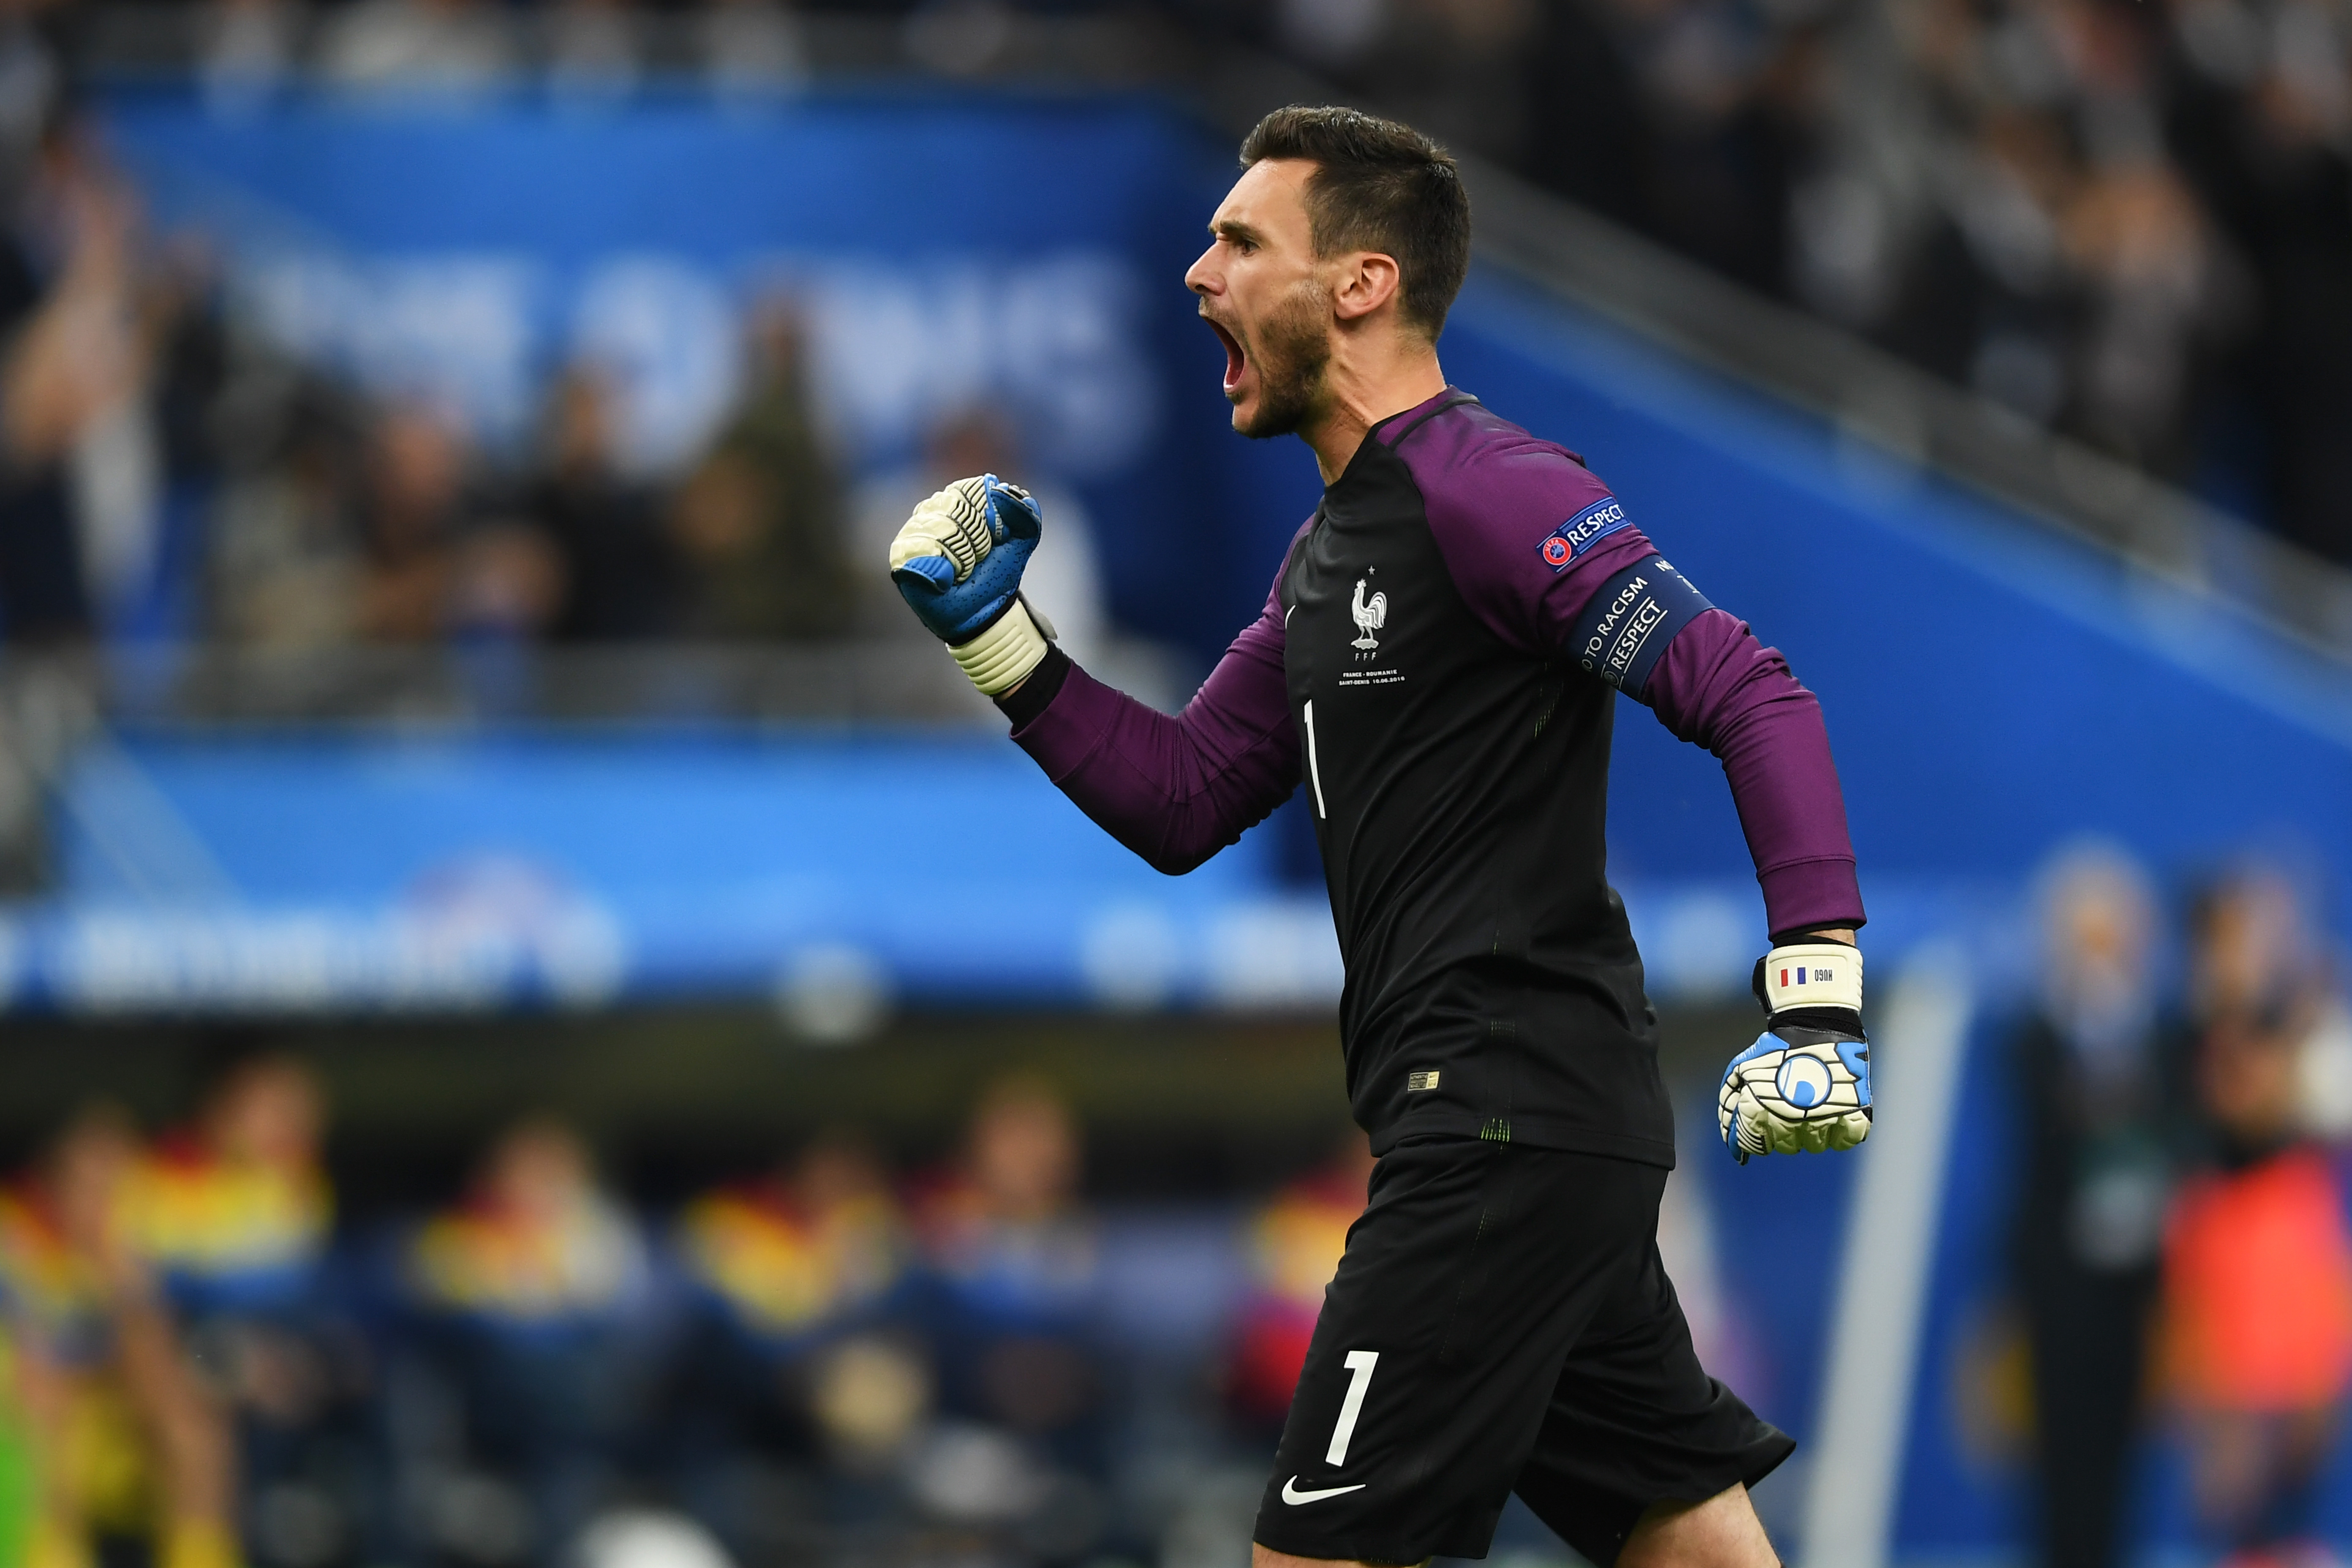 PARIS, FRANCE - JUNE 10:  Hugo Lloris of France celebrates his team's first goal during the UEFA Euro 2016 Group A match between France and Romania at Stade de France on June 10, 2016 in Paris, France.  (Photo by Shaun Botterill/Getty Images)